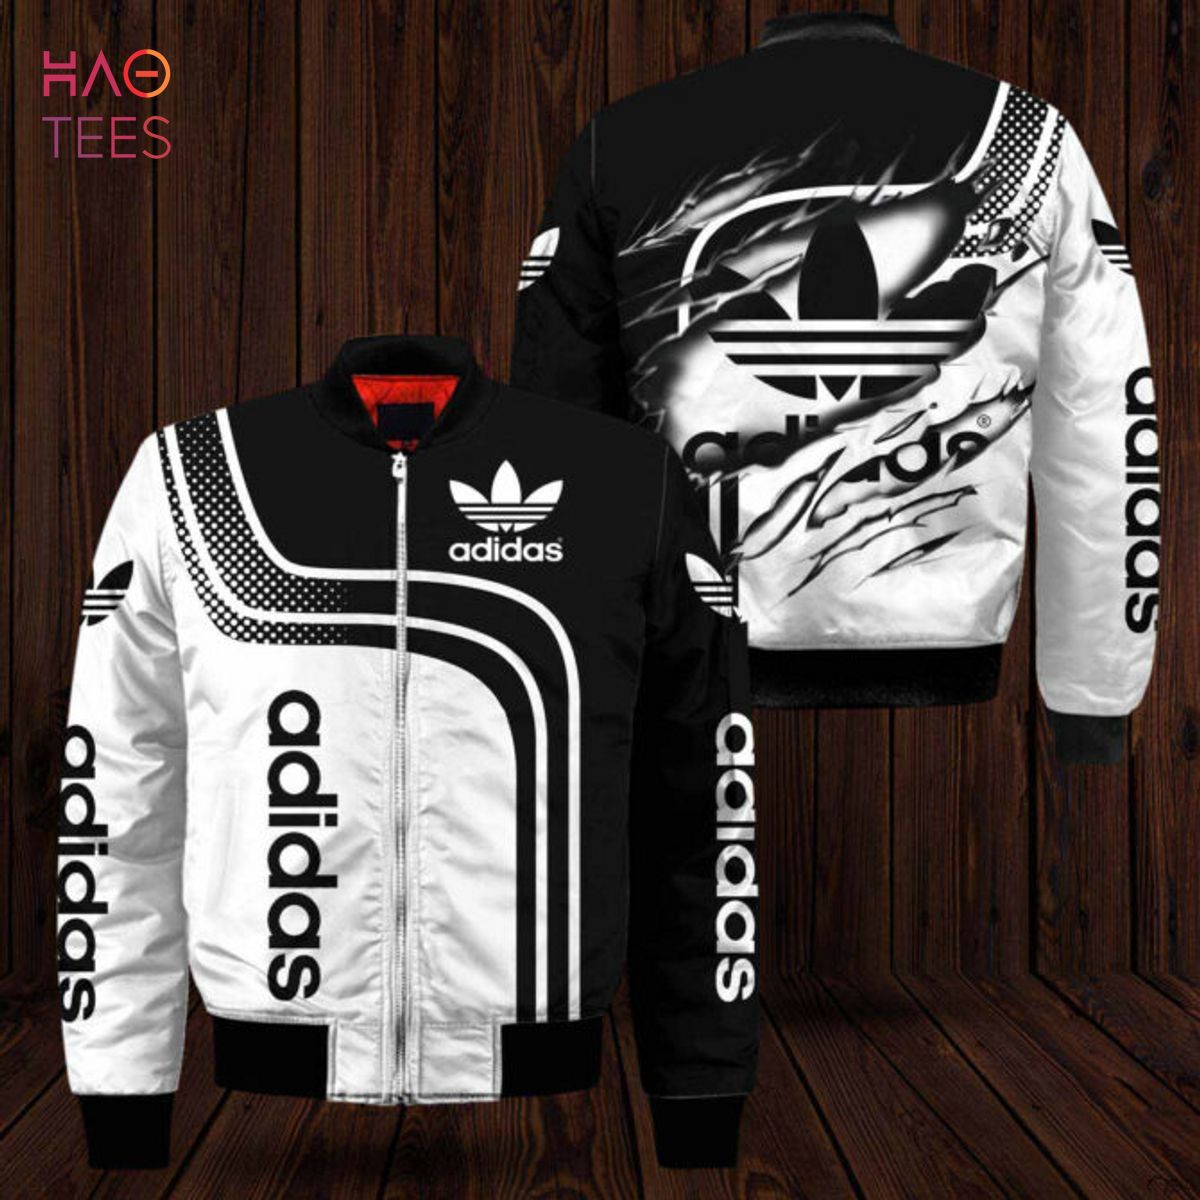 THE BEST Adidas Luxury Brand Printing 3D Black White Bomber Jacket Limited Edition